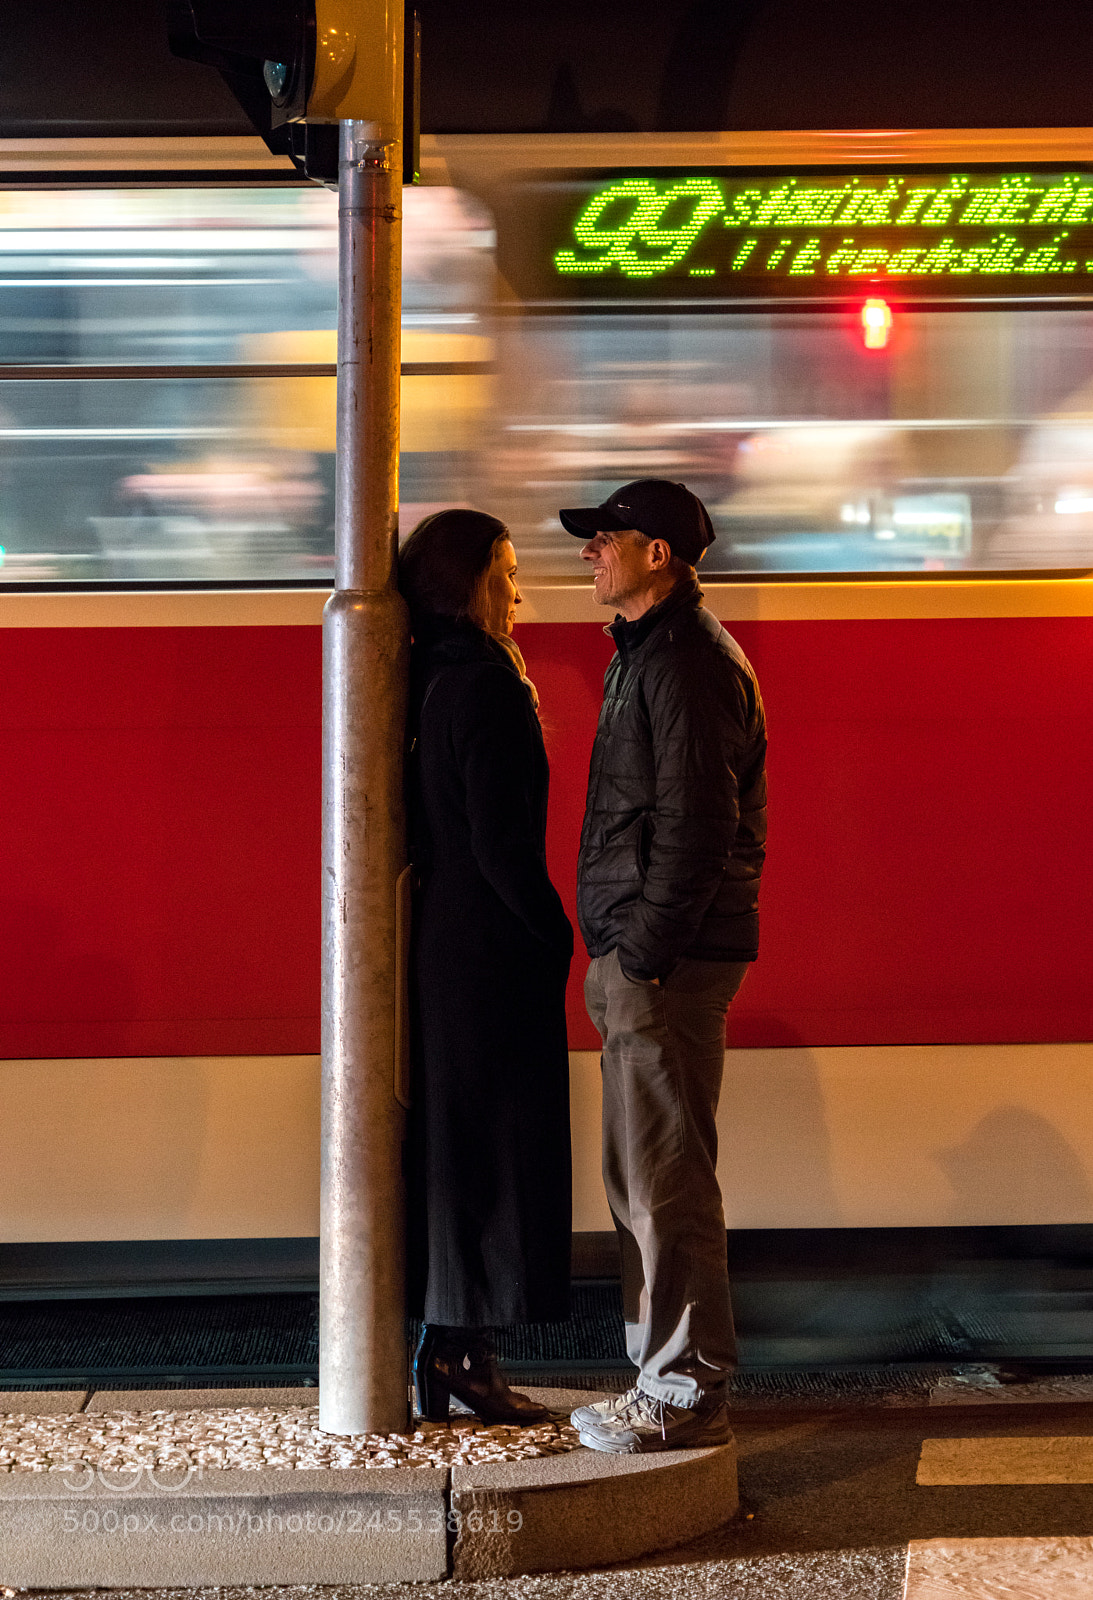 Sony a7R II sample photo. Tight tram stop photography